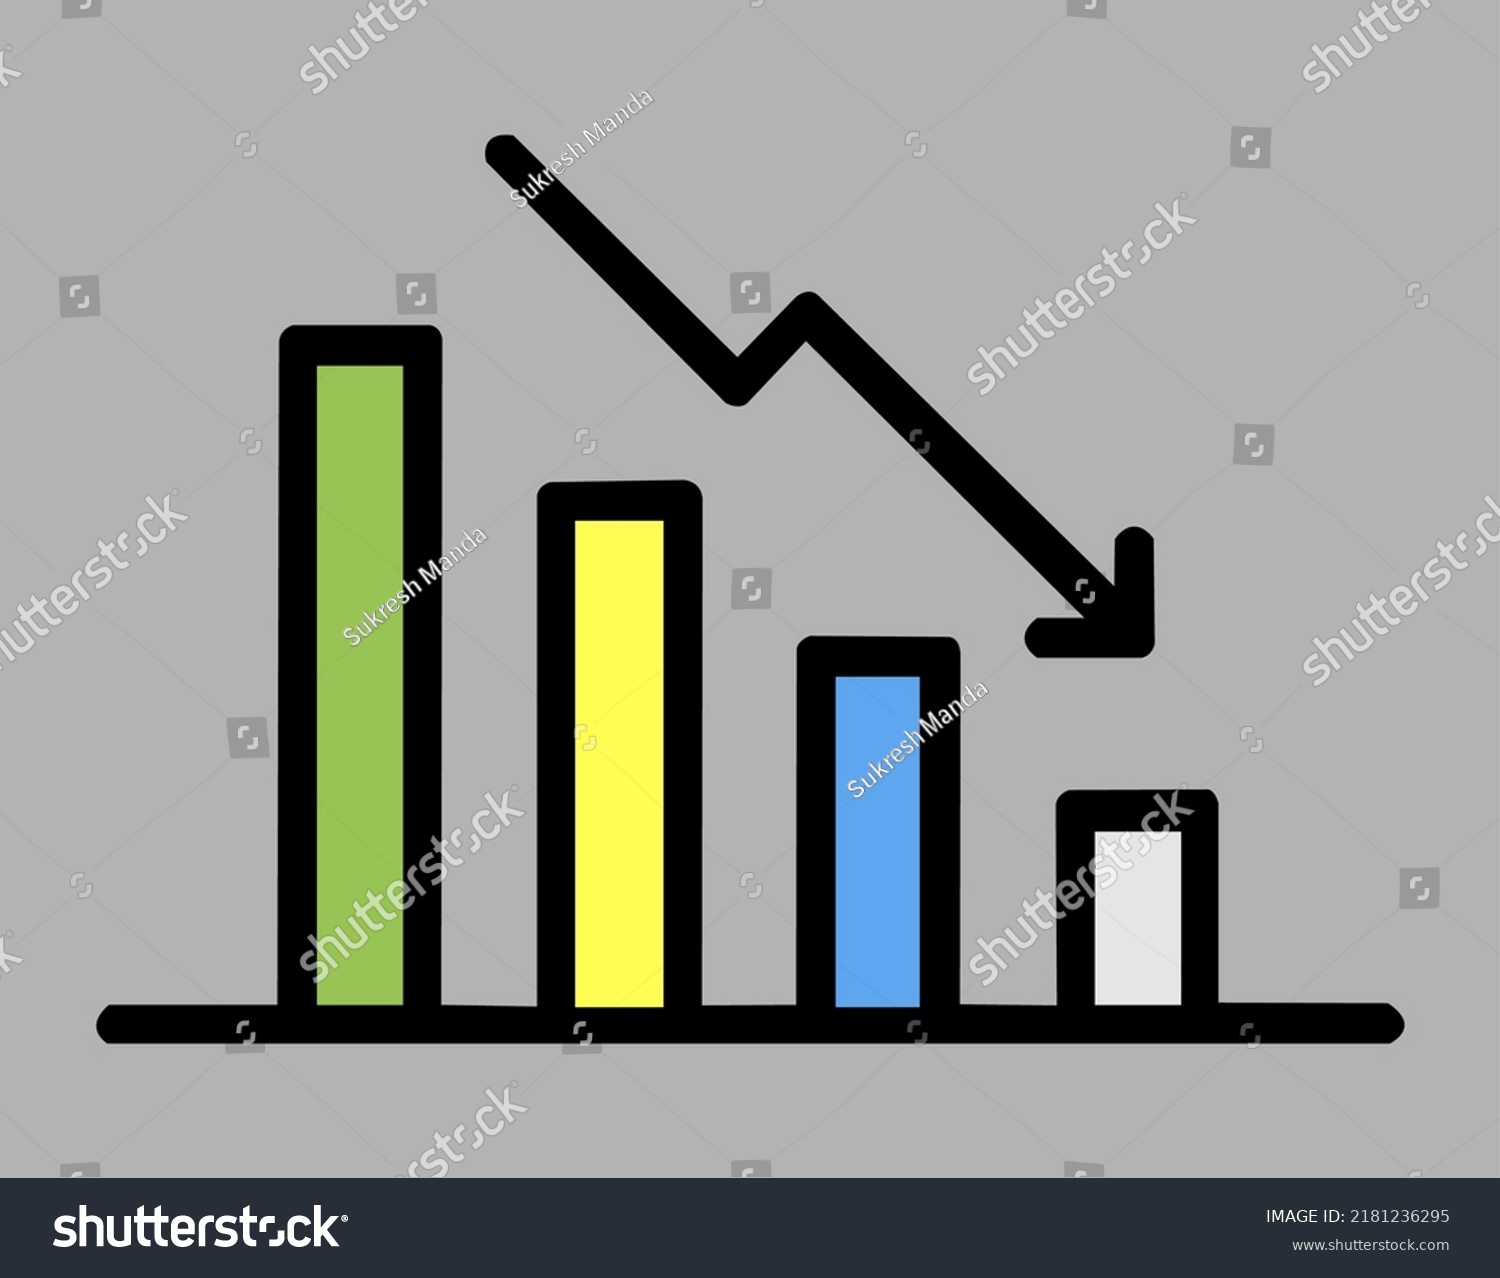 Graph Declining Trend Vector Art Made Stock Vector Royalty Free